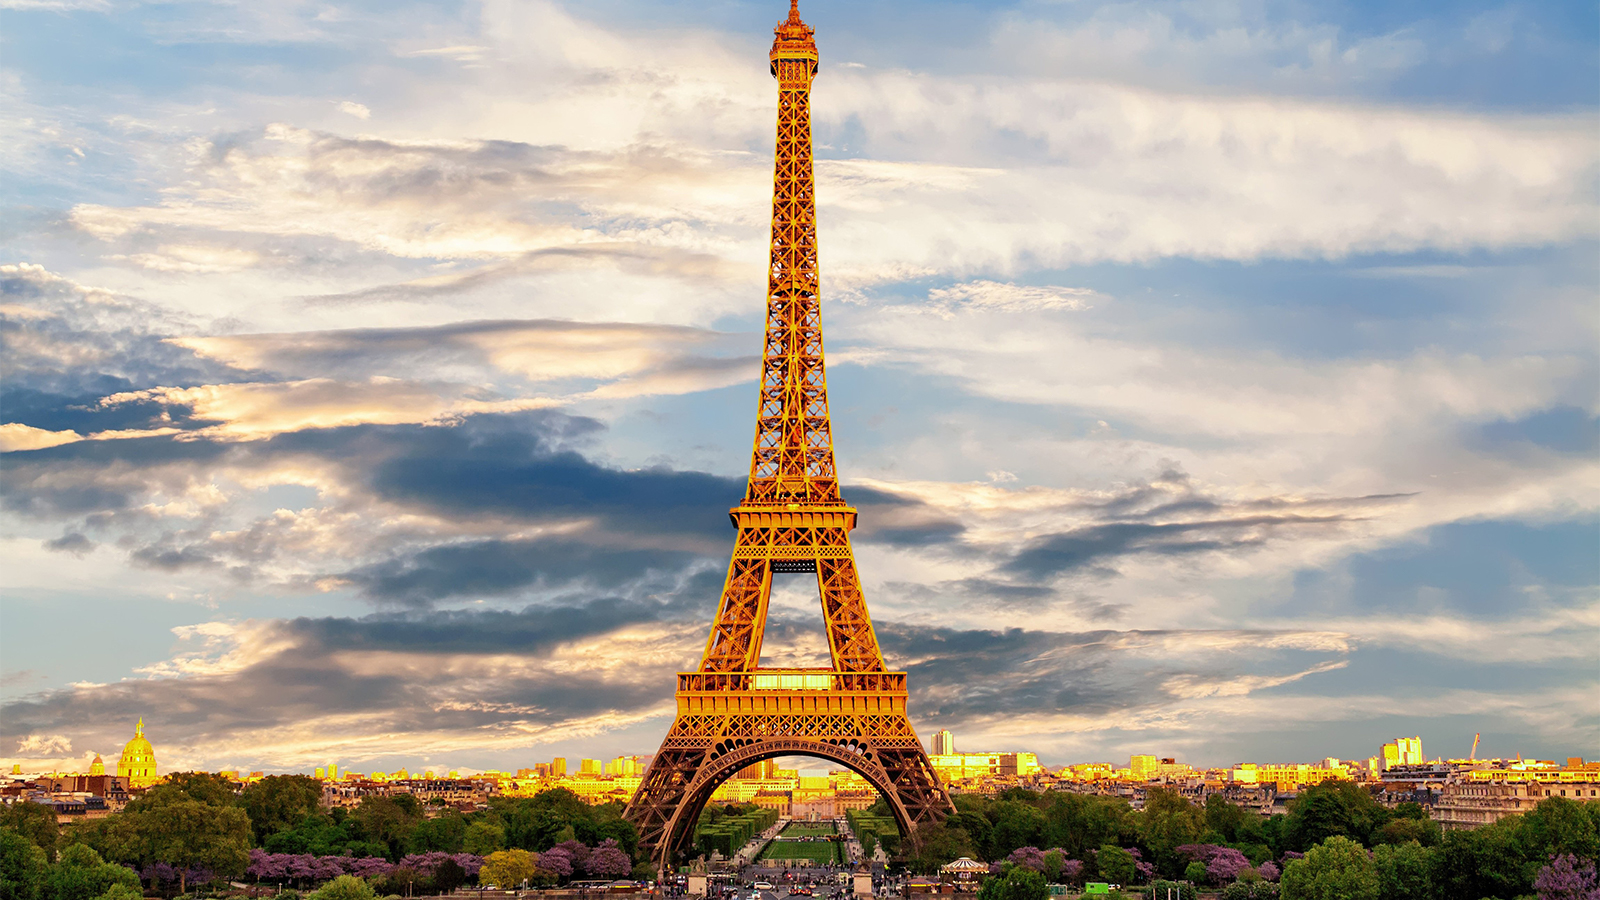 an image of the Eiffel Tower